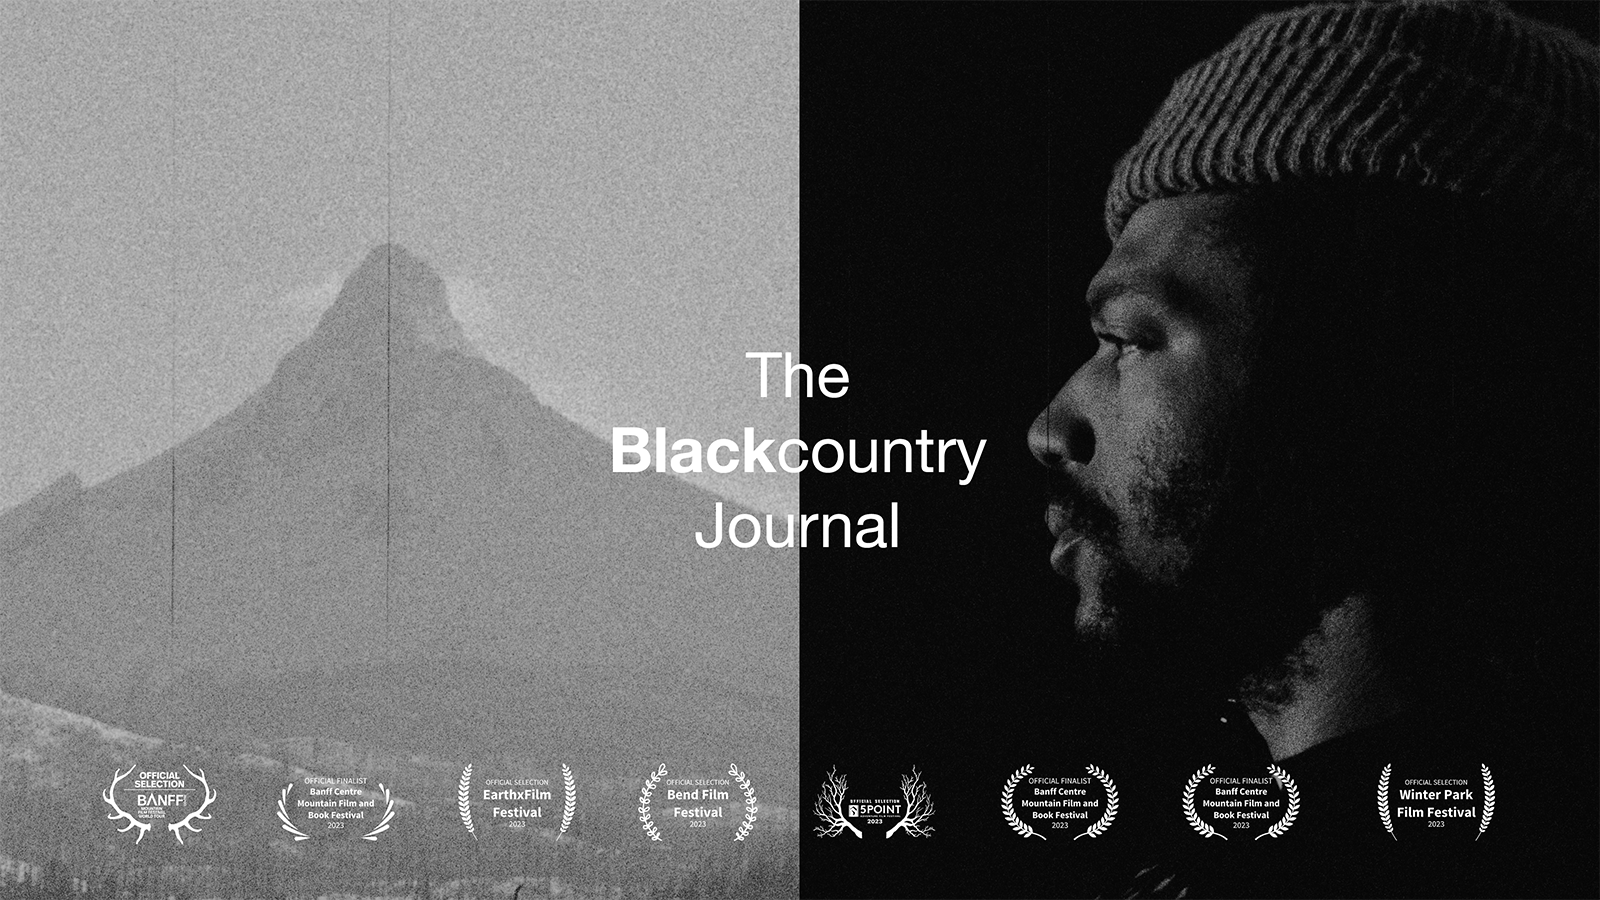 Watch: The Blackcountry Journal